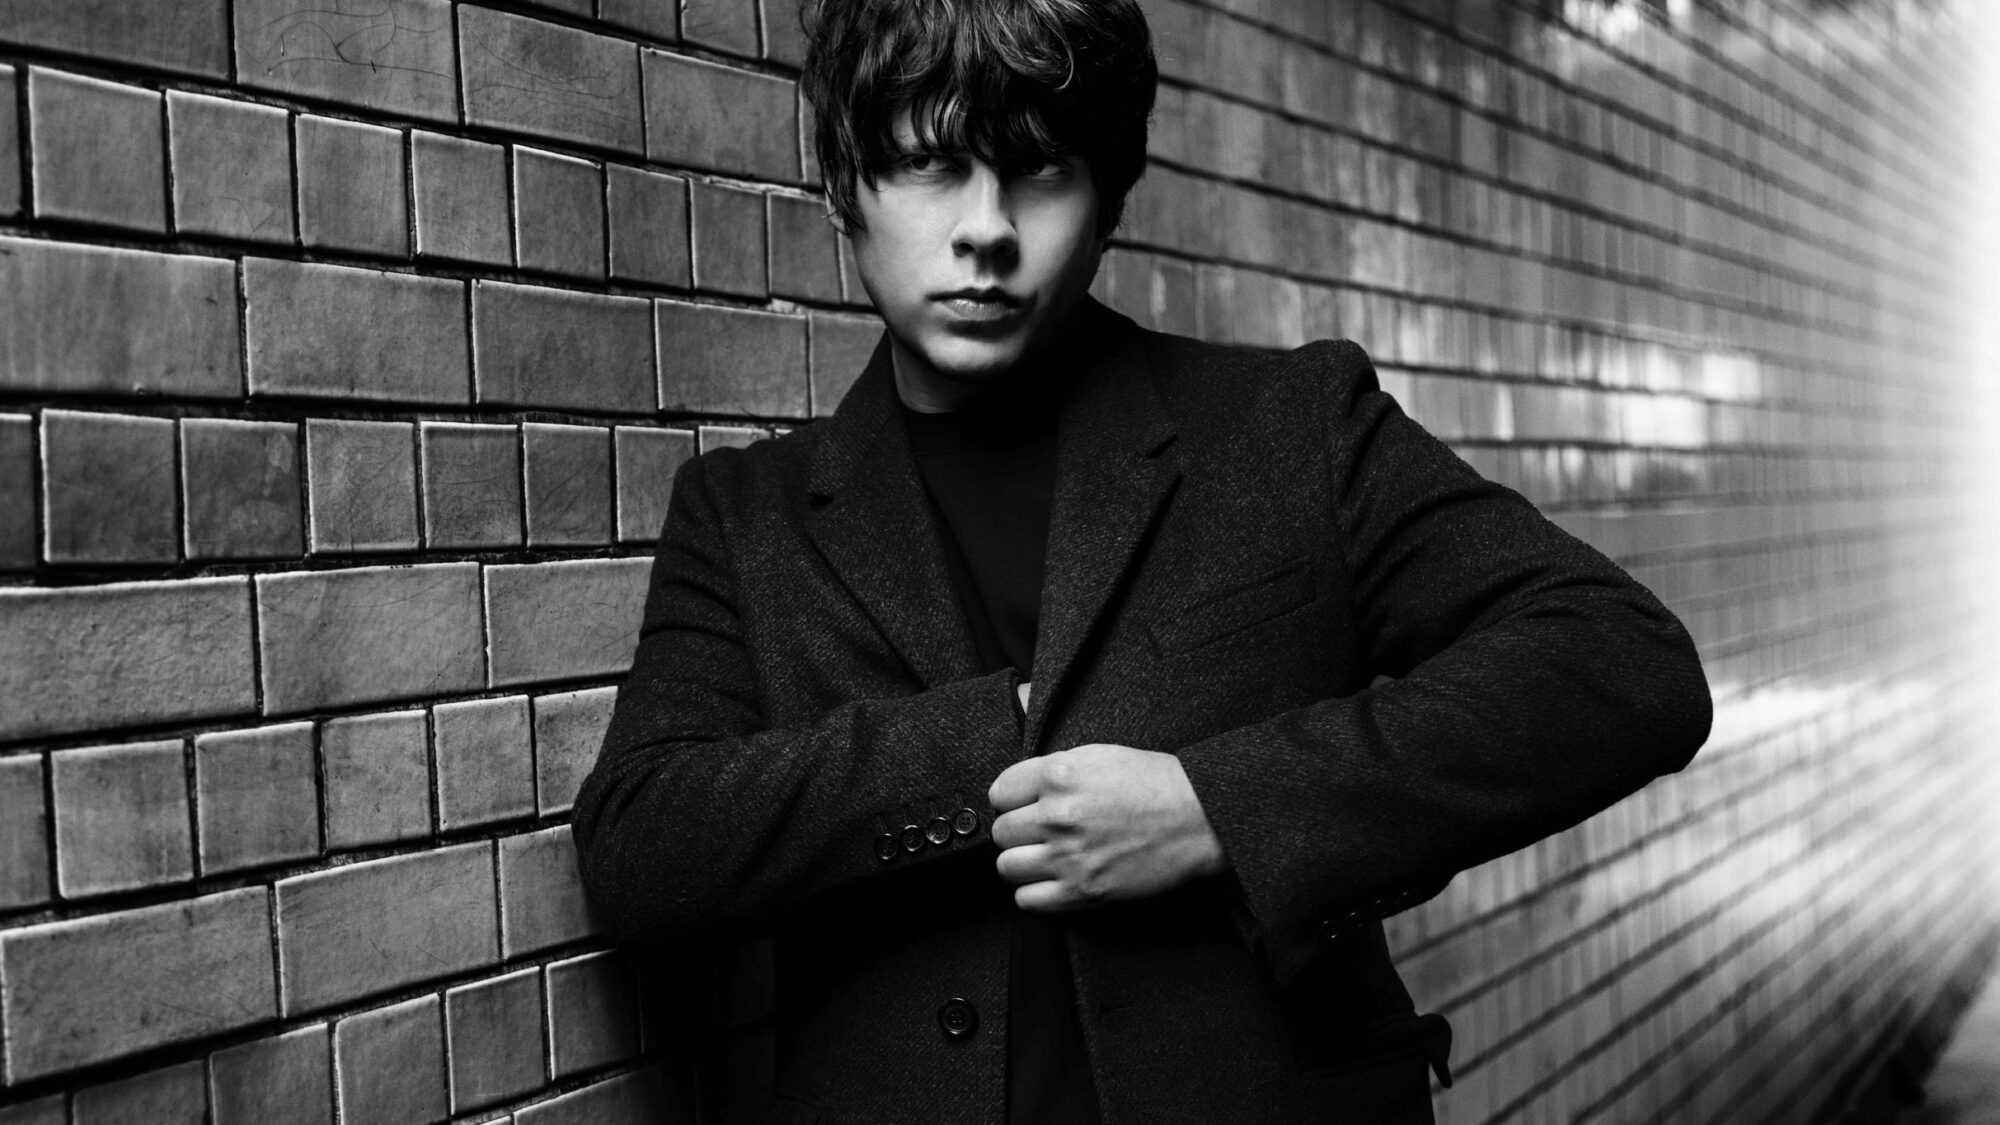 Image name Jake Bugg The Modern Day Distraction Tour at O2 Academy Leeds Leeds the 1 image from the post Jake Bugg - The Modern Day Distraction Tour at O2 Academy Leeds, Leeds in Yorkshire.com.